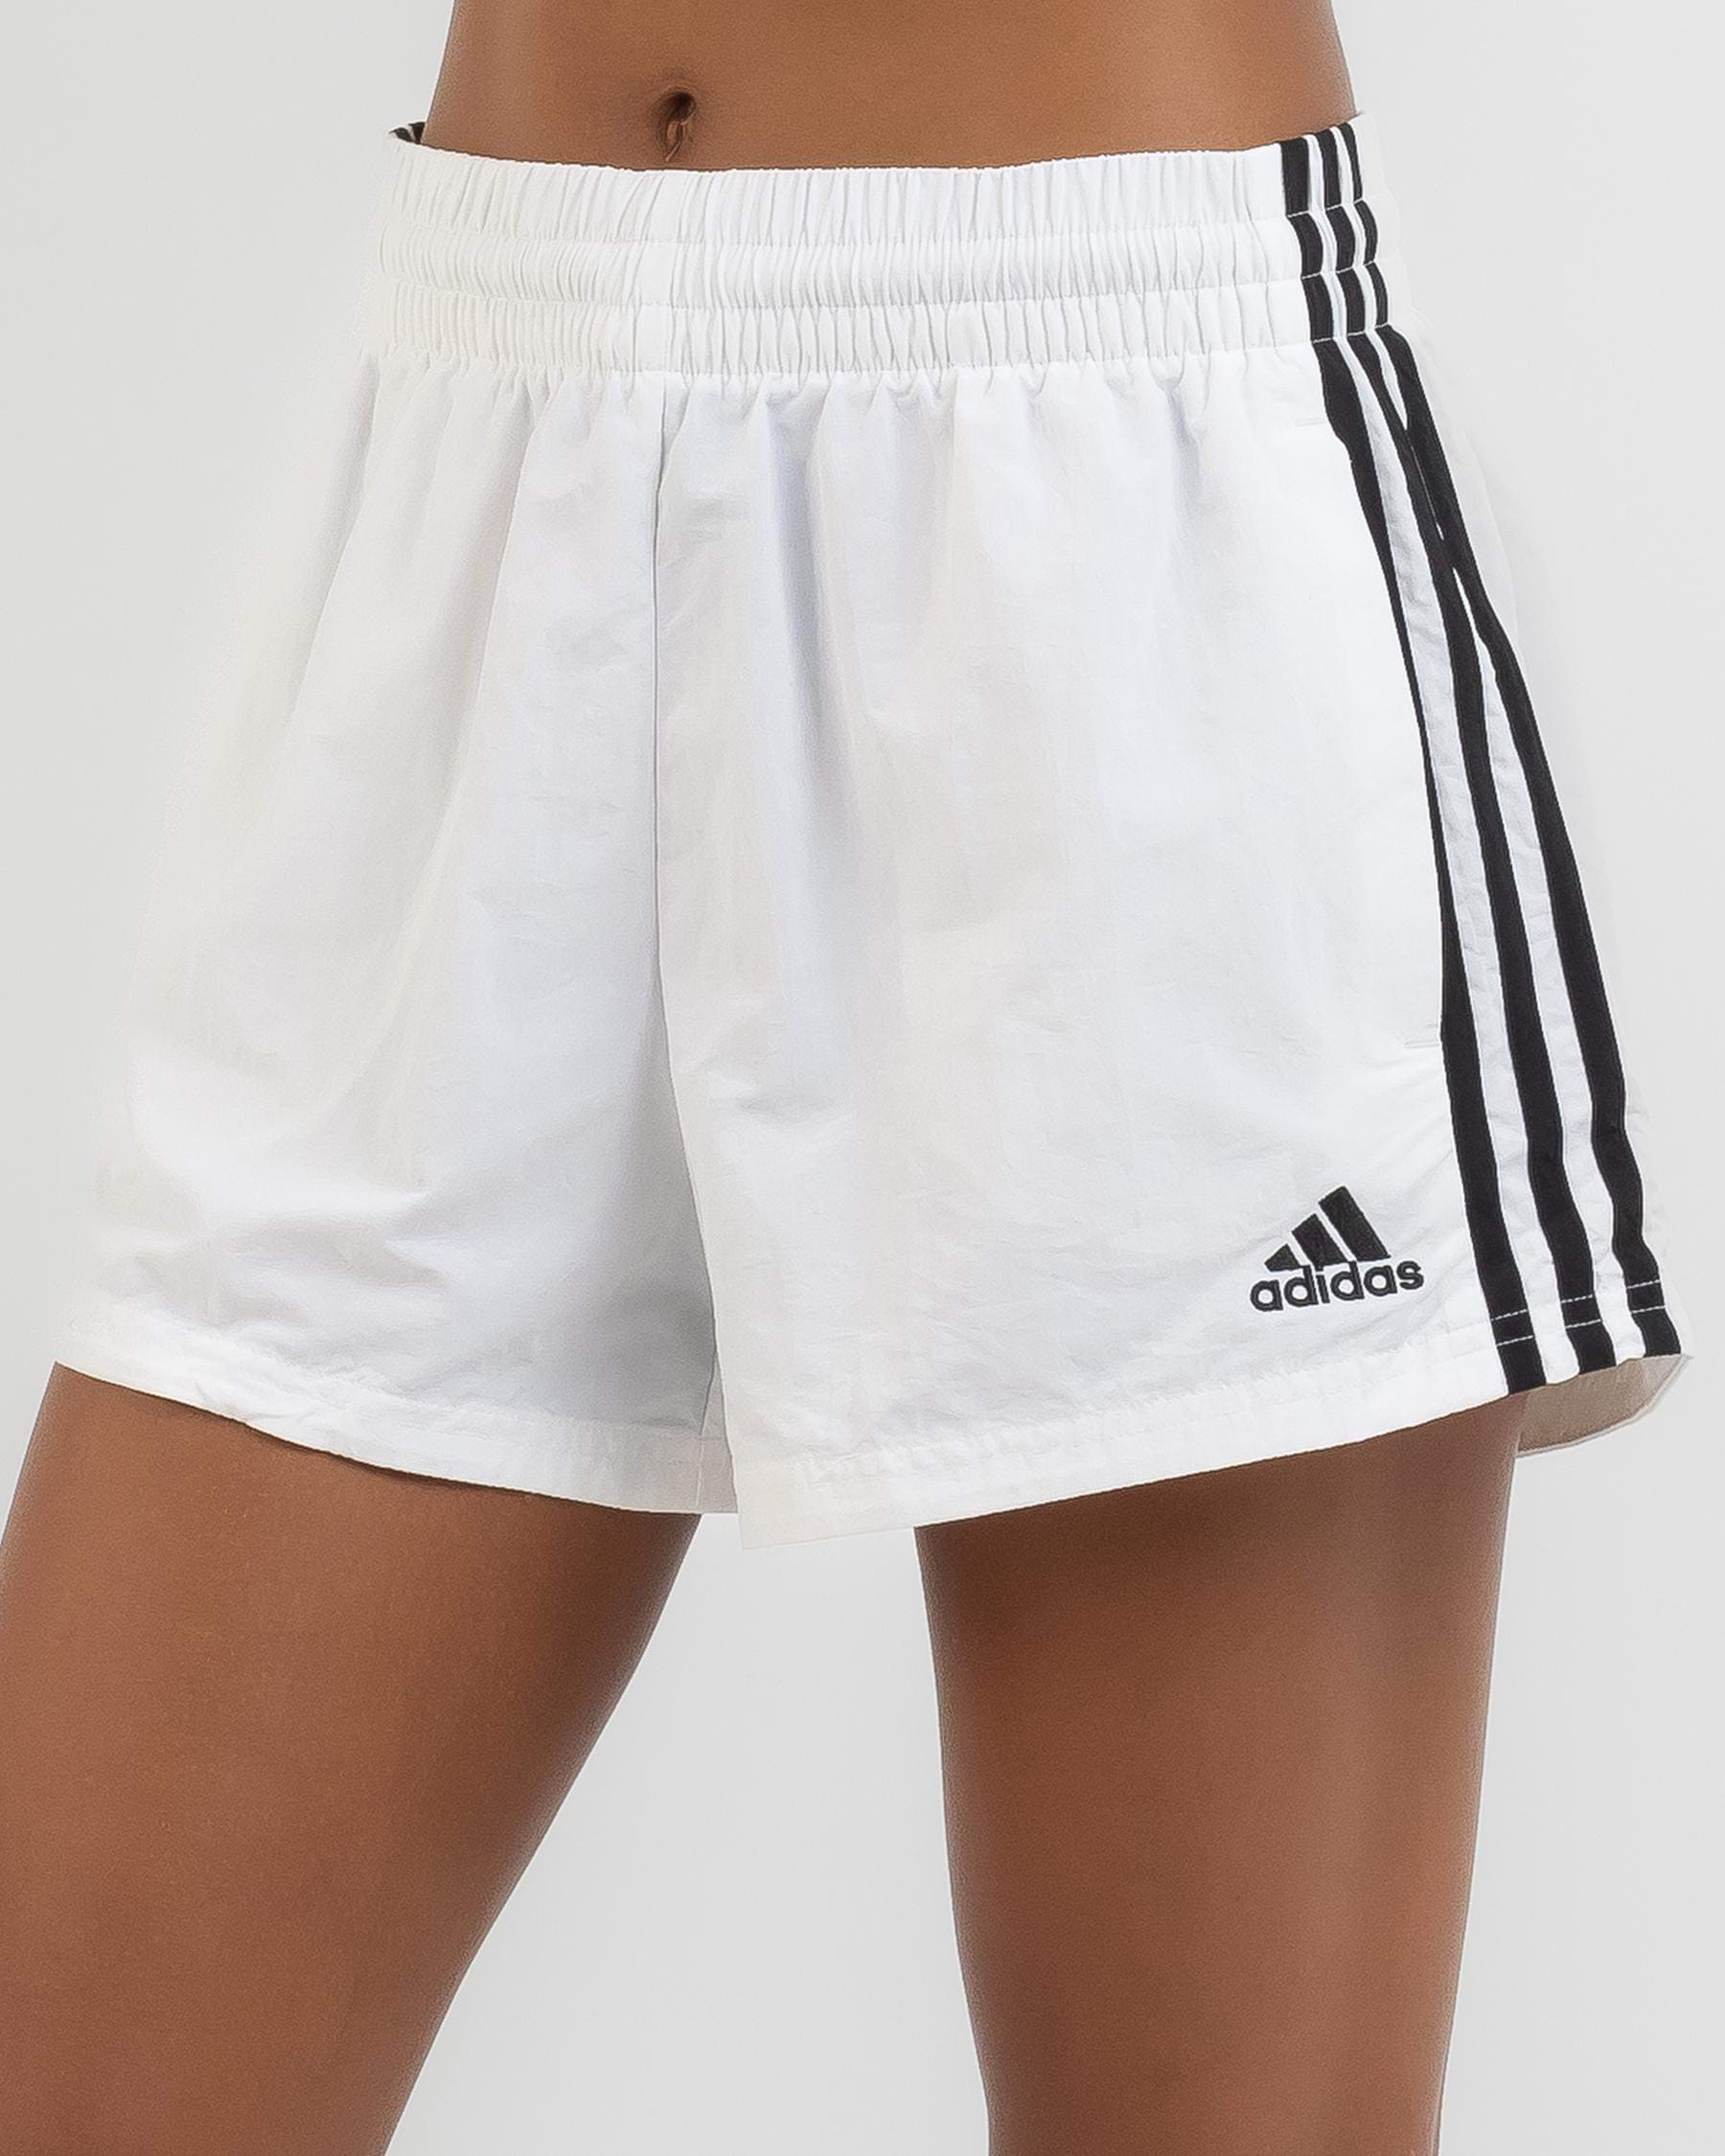 Adidas Essentials 3 Stripe Woven Shorts In White/black - FREE* Shipping &  Easy Returns - City Beach United States